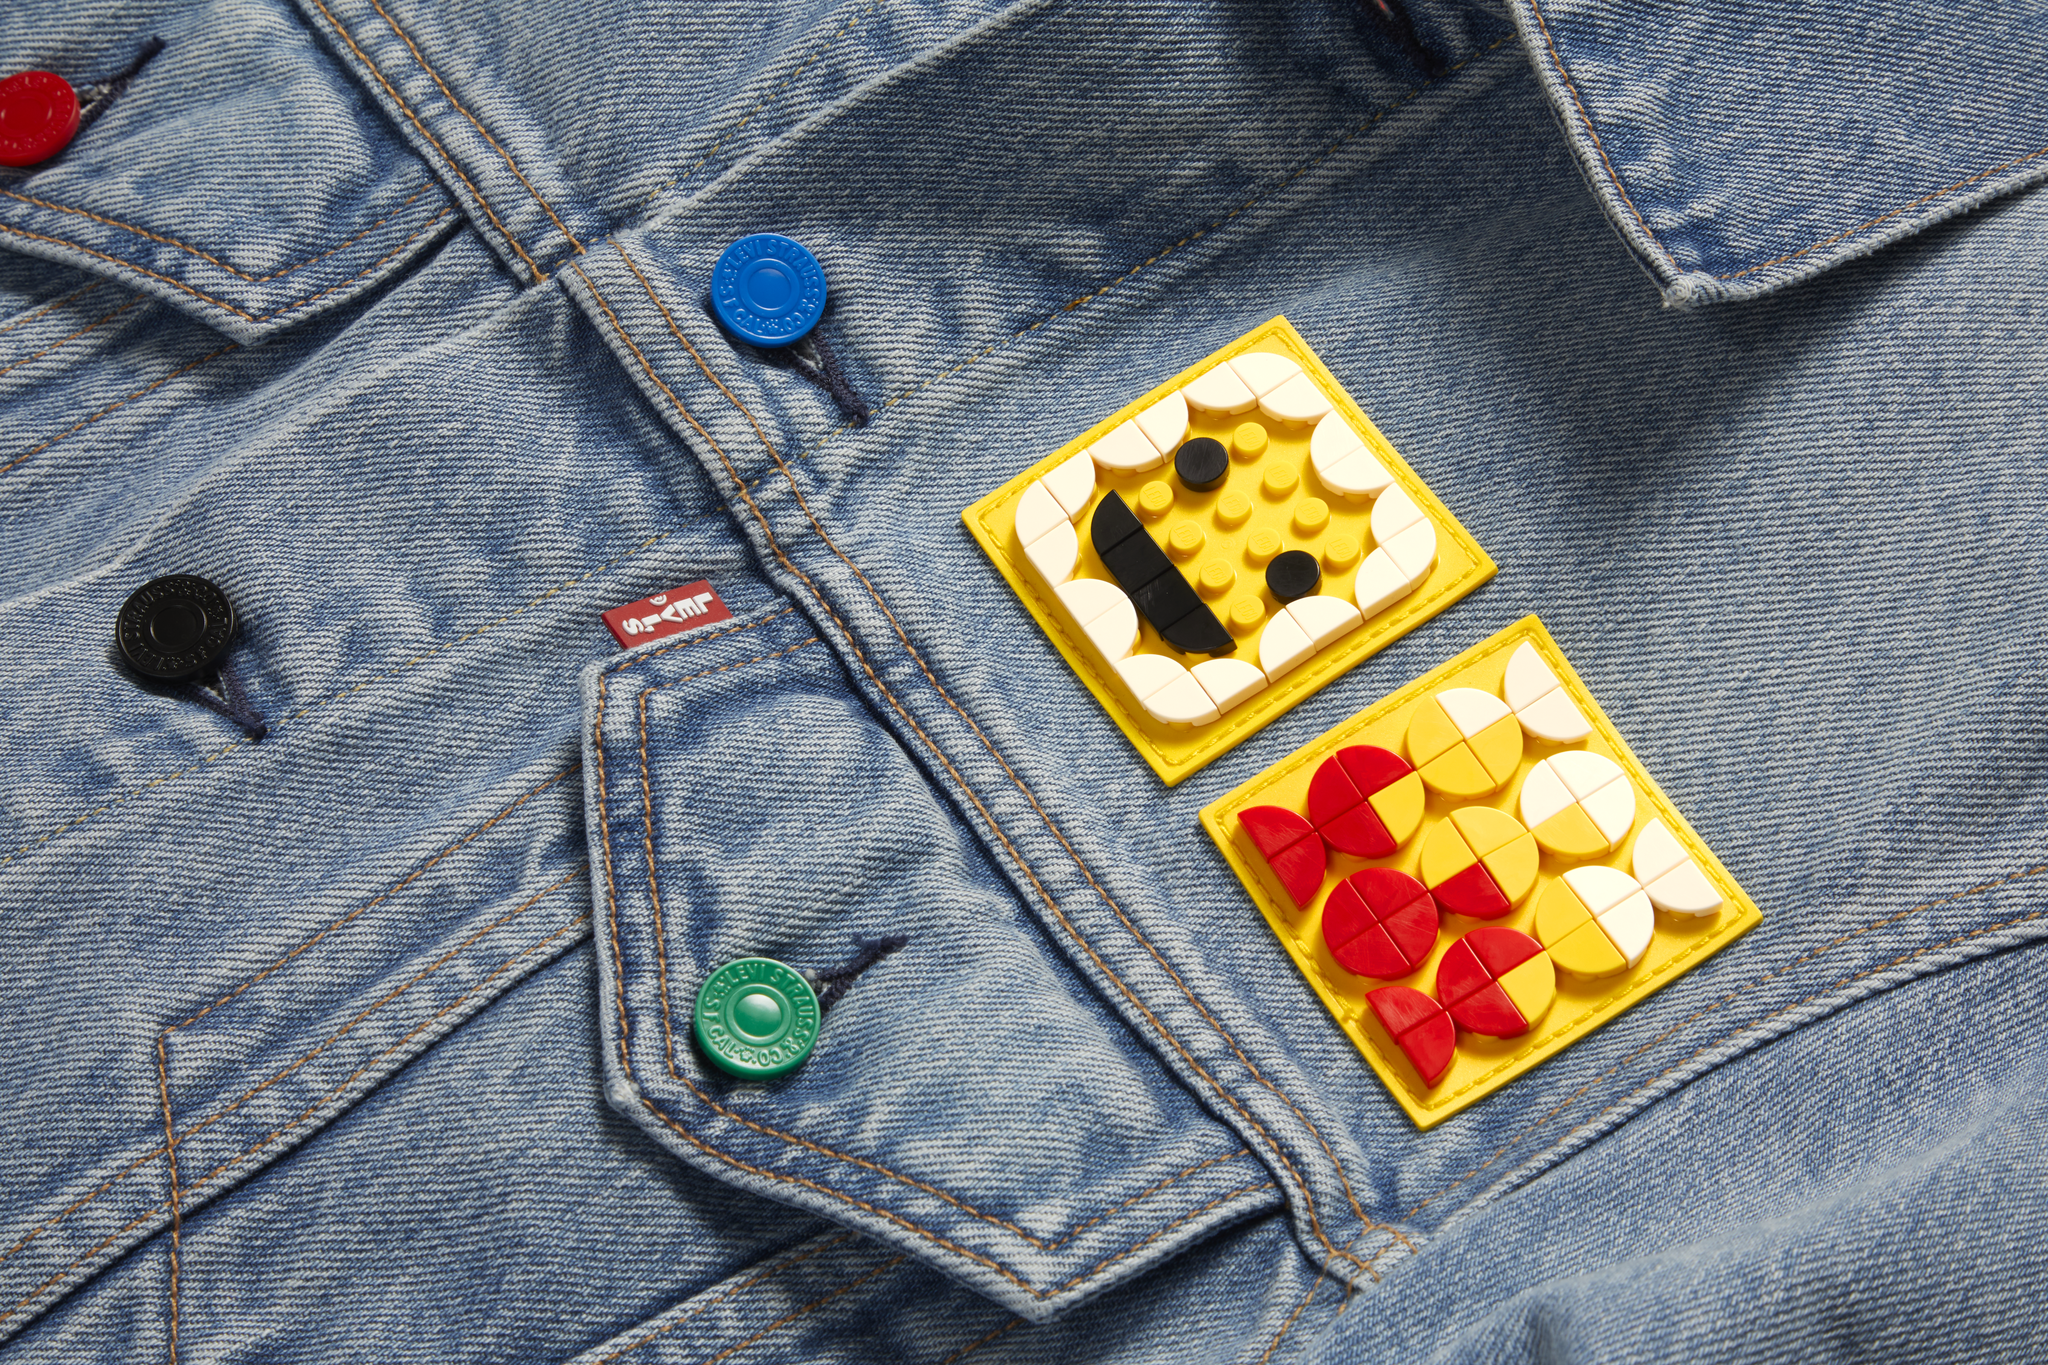 Fashion, Shopping & Style | Levi's New Lego Collaboration Just Gave Denim  the Crazy Cool Upgrade We Never Saw Coming | POPSUGAR Fashion Photo 6